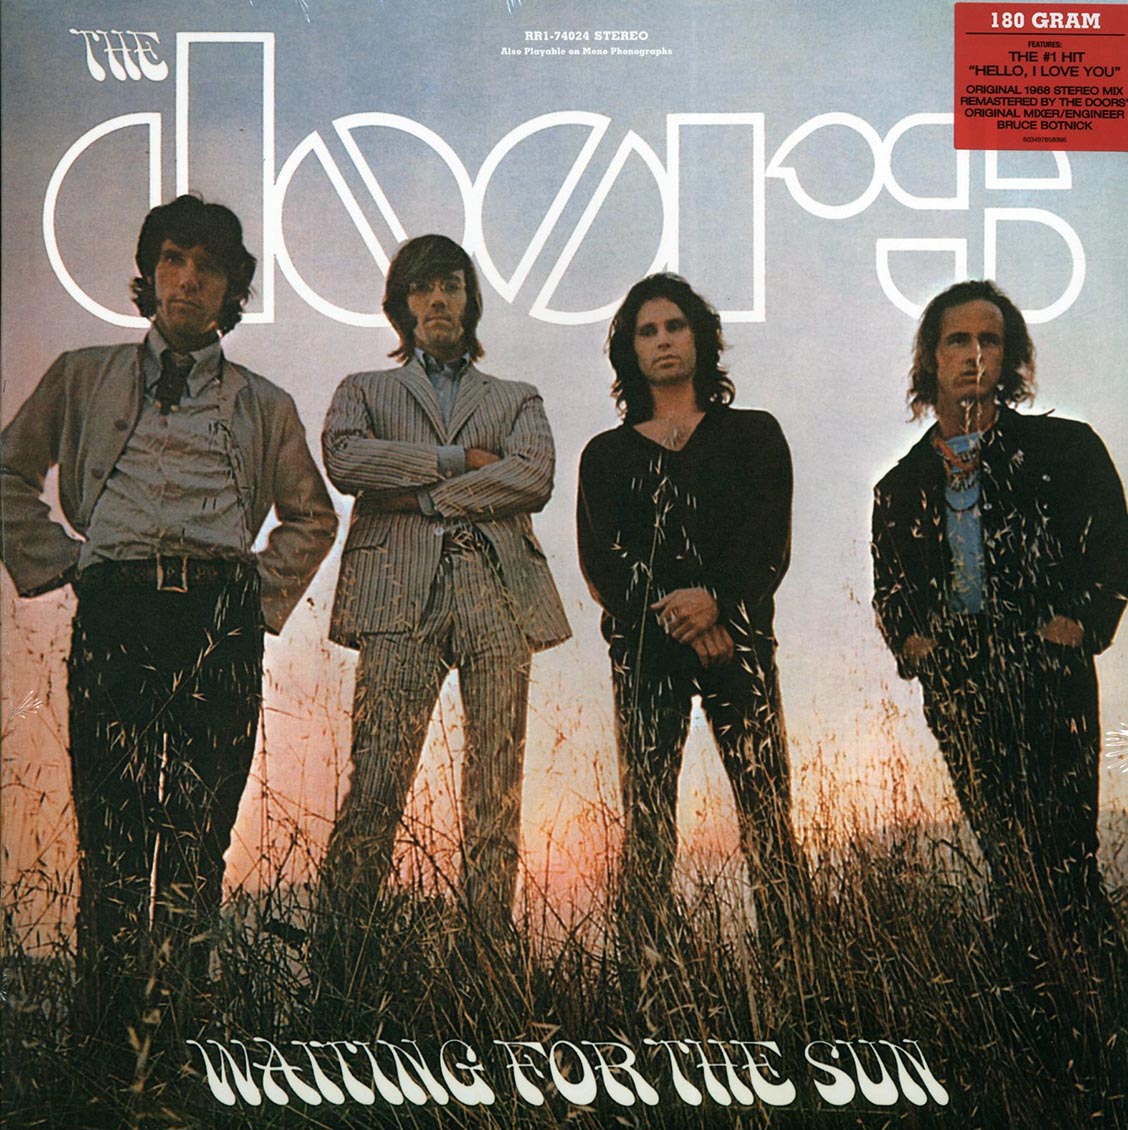 The Doors - Waiting For The Sun (stereo) (180g) (remastered) - Vinyl LP